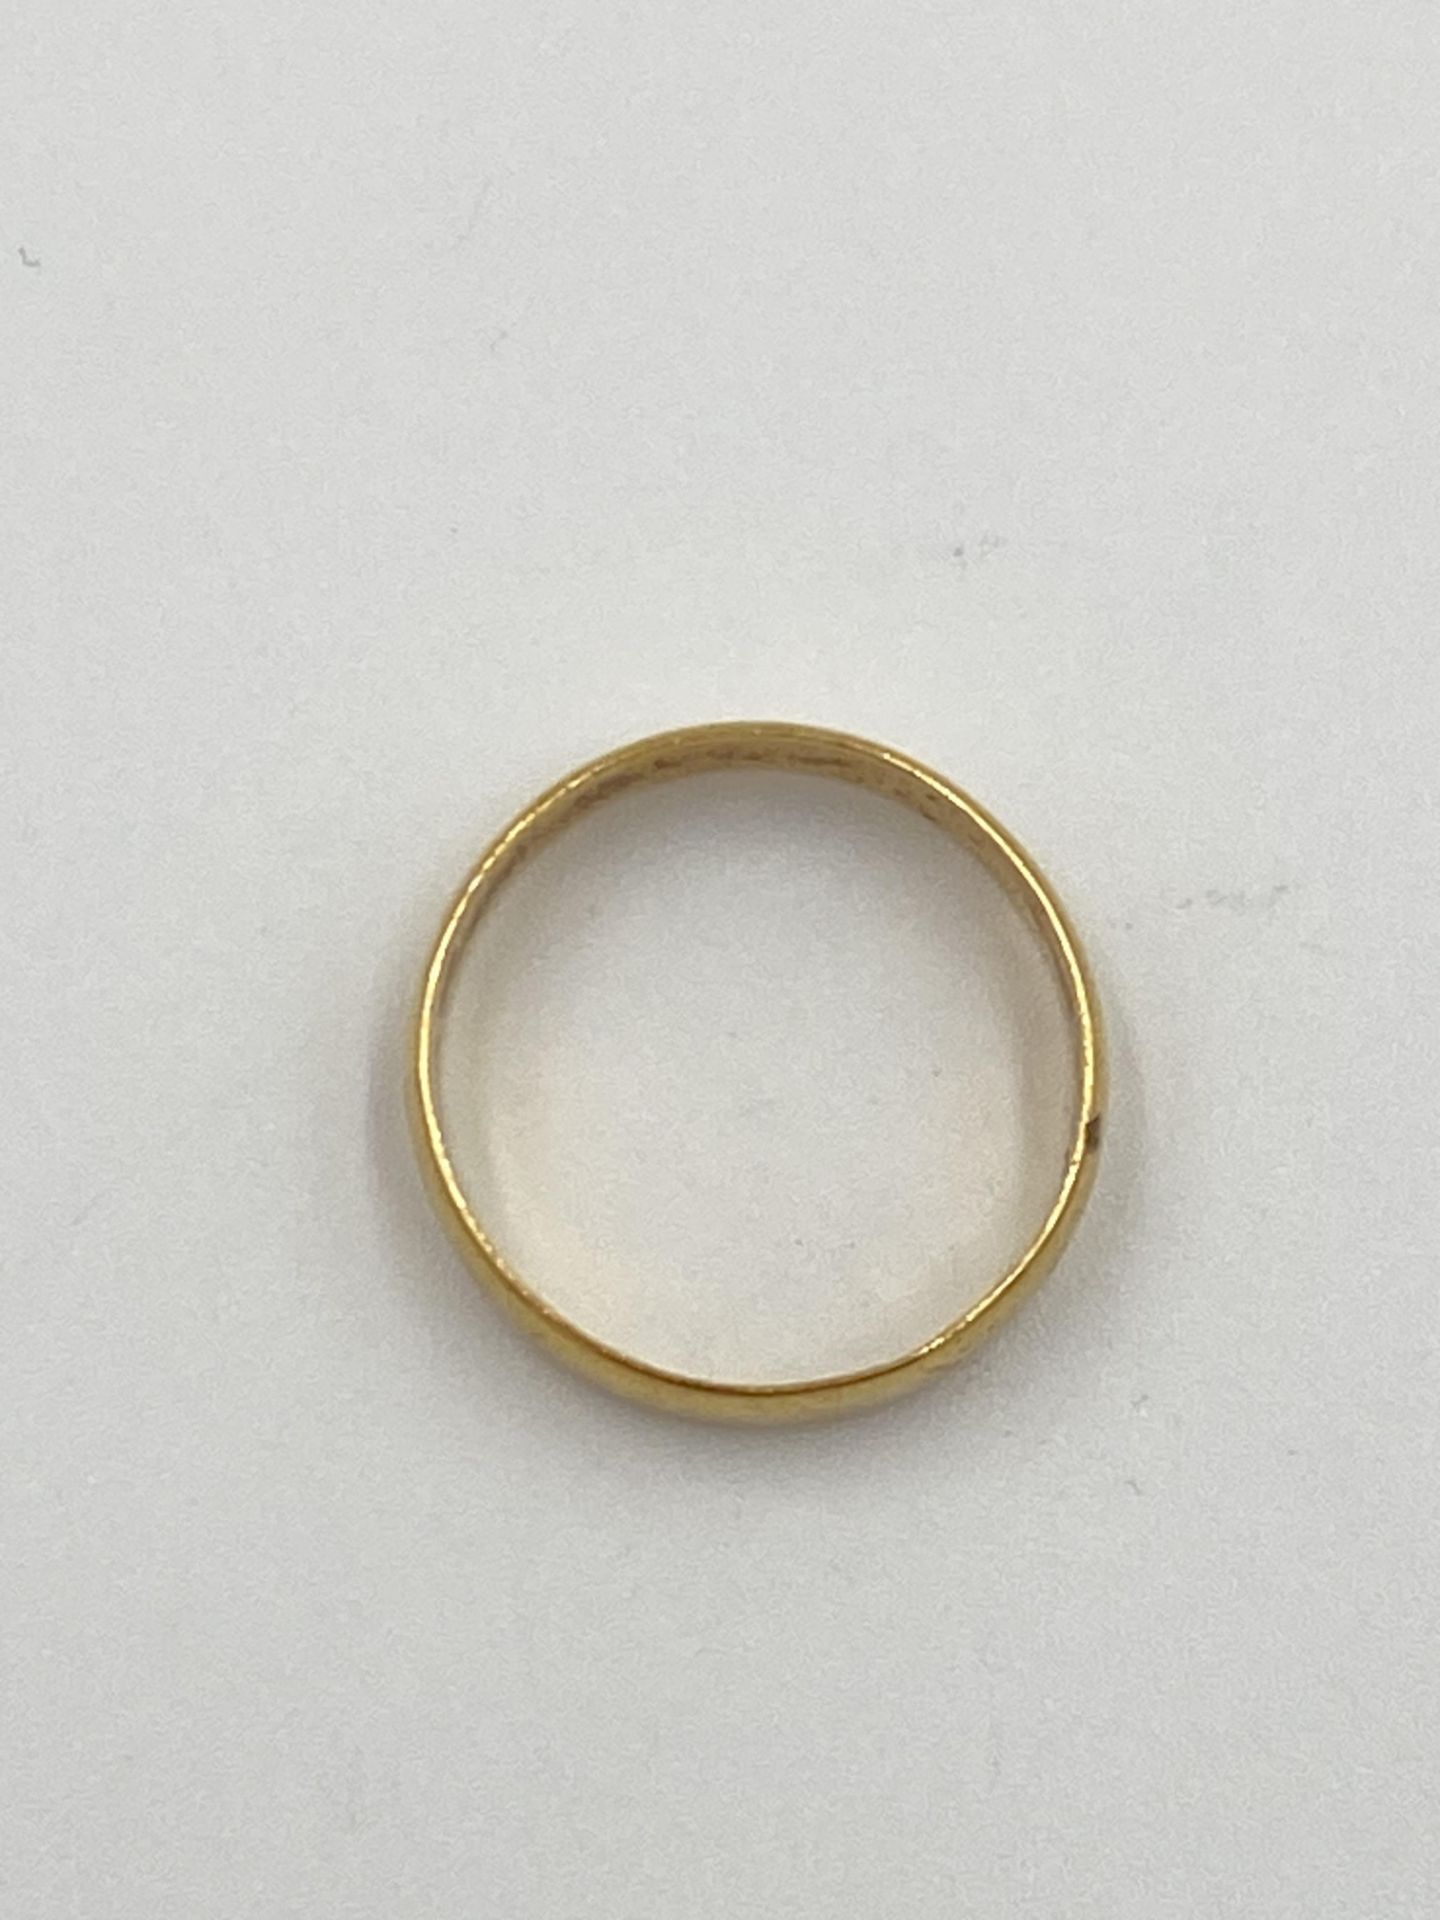 22ct gold band - Image 2 of 3